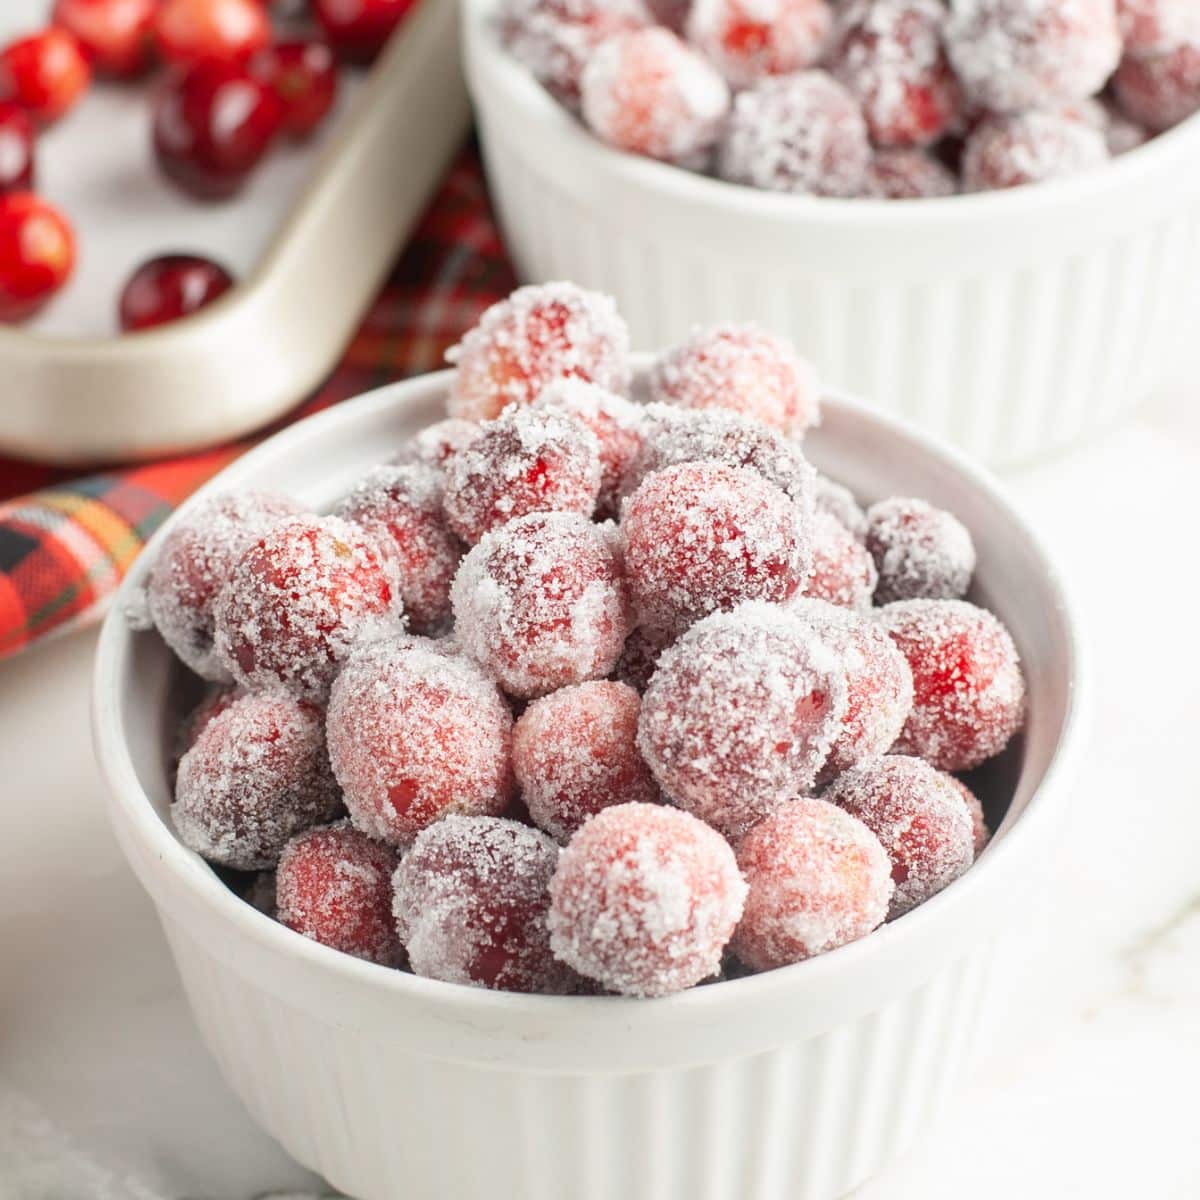 Easy Sugared Cranberries Recipe - How to Make Sugared Cranberries